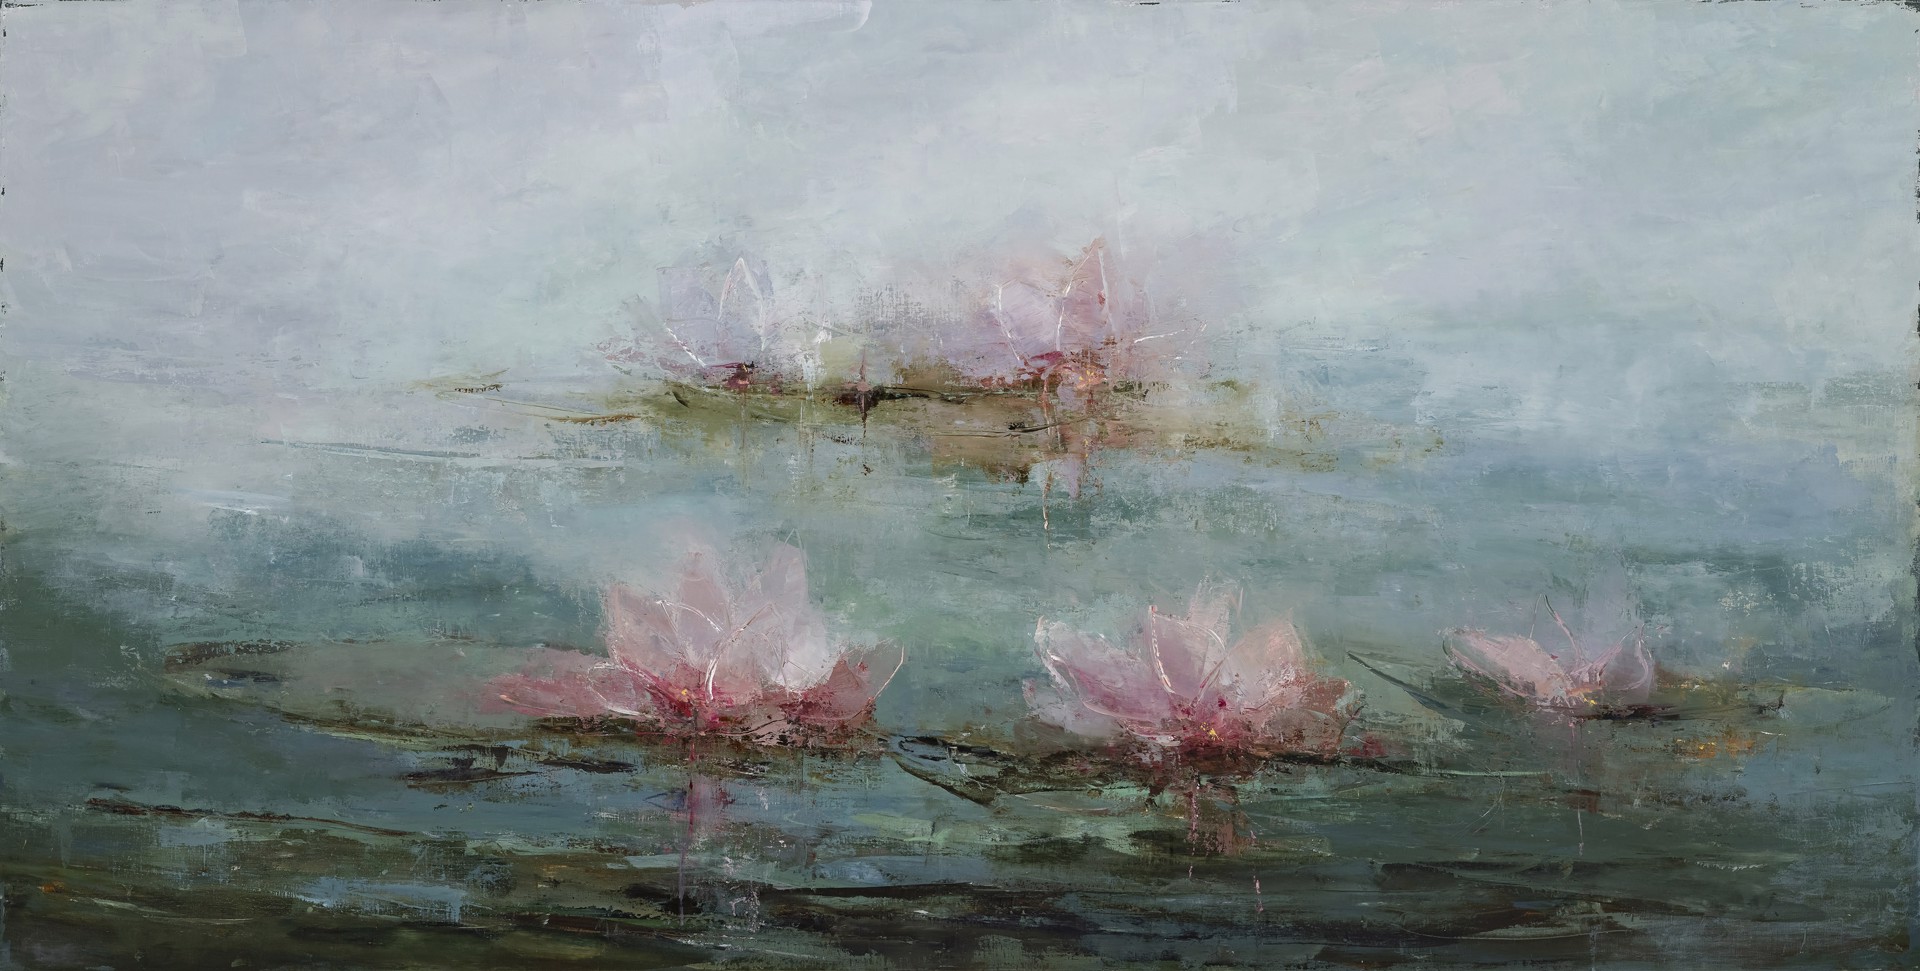 The Day is Like Wide Water, Without Sound, Stilled for the Passing of Her Dreaming Feet by France Jodoin